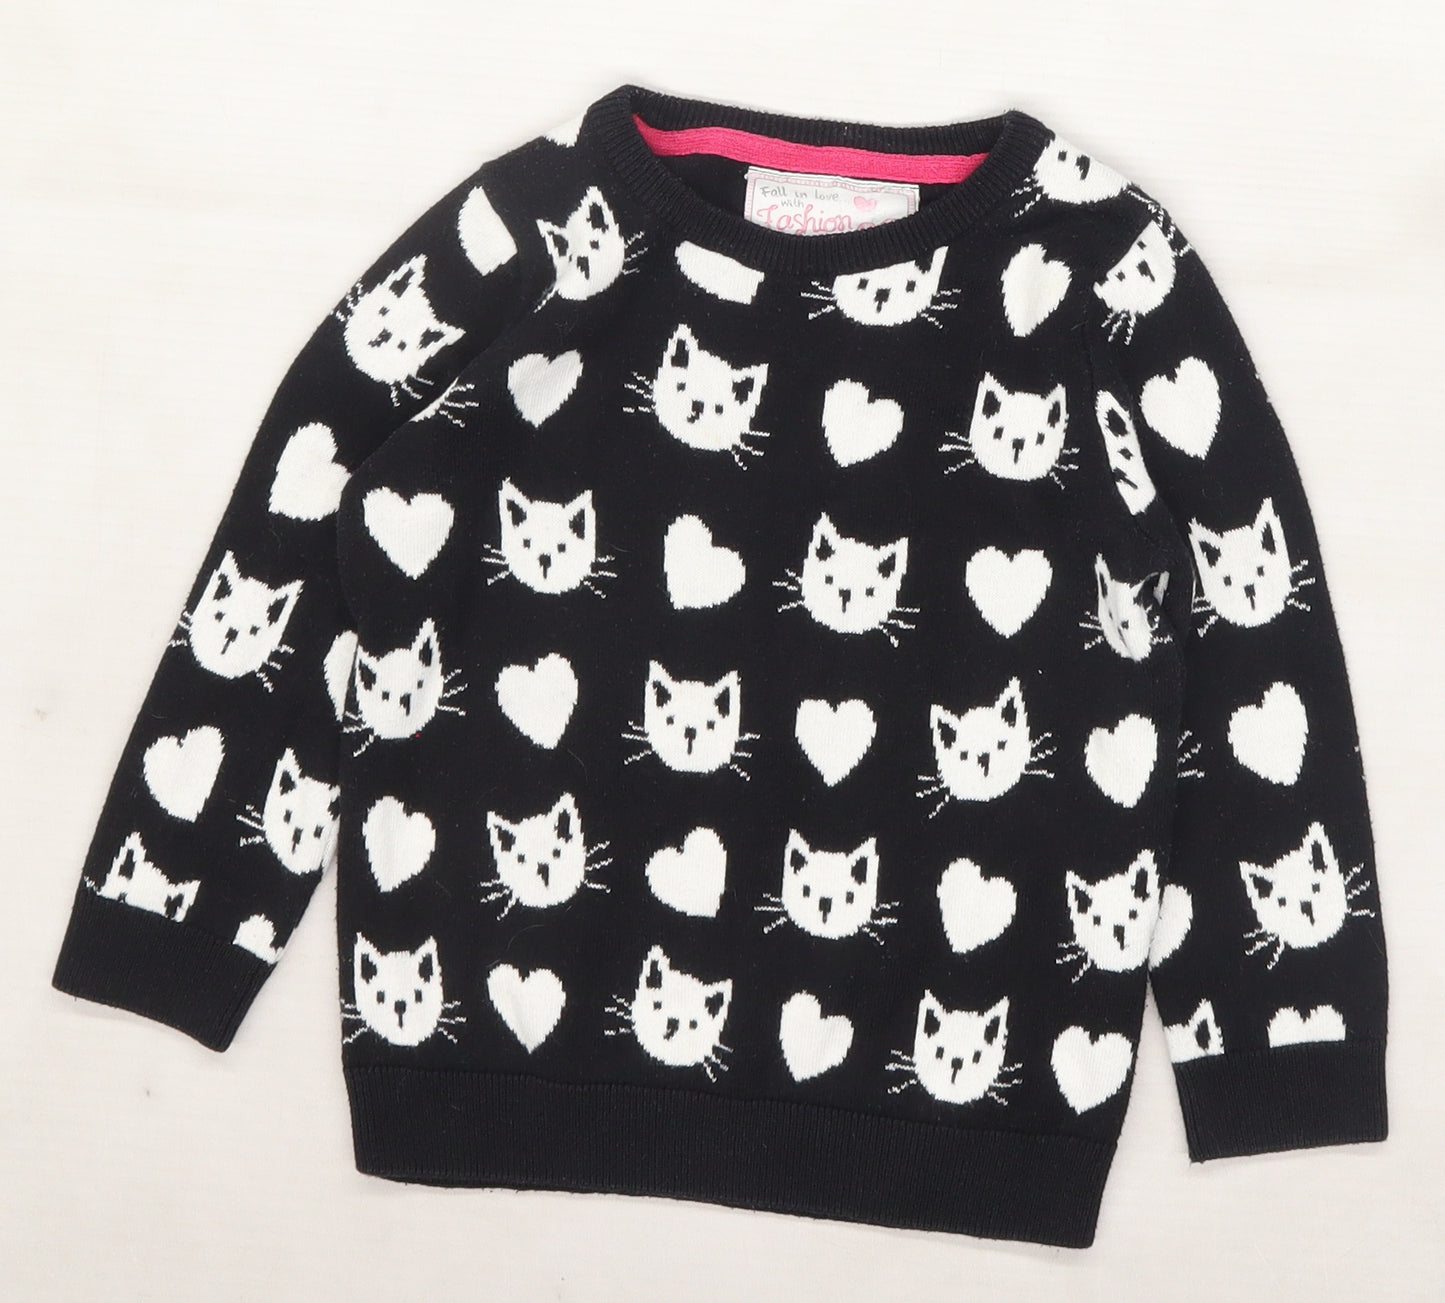 Young Dimension Girls Black Geometric Knit Pullover Jumper Size 2-3 Years  - Hearts Cats